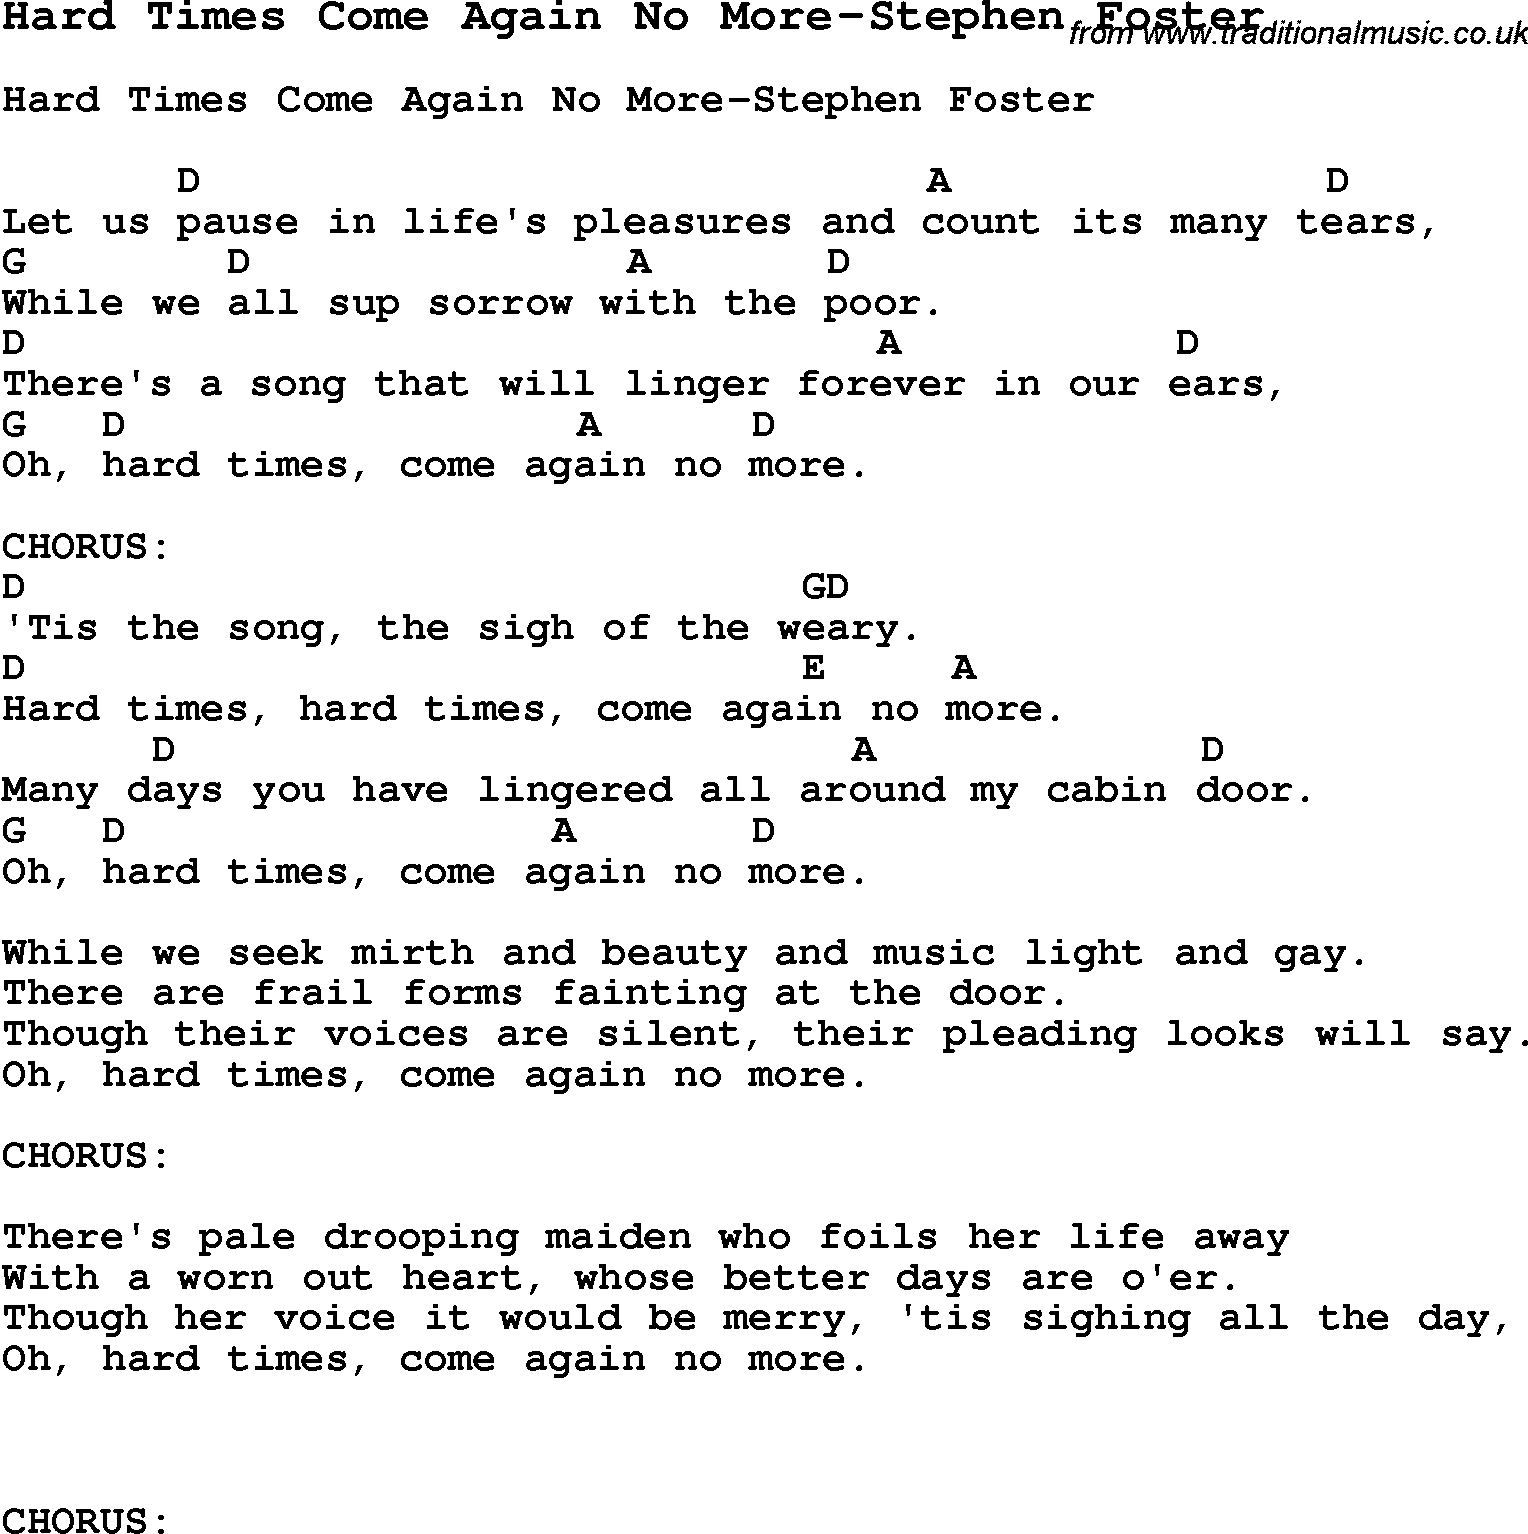 Summer-Camp Song, Hard Times Come Again No More-Stephen Foster, with lyrics and chords for Ukulele, Guitar Banjo etc.